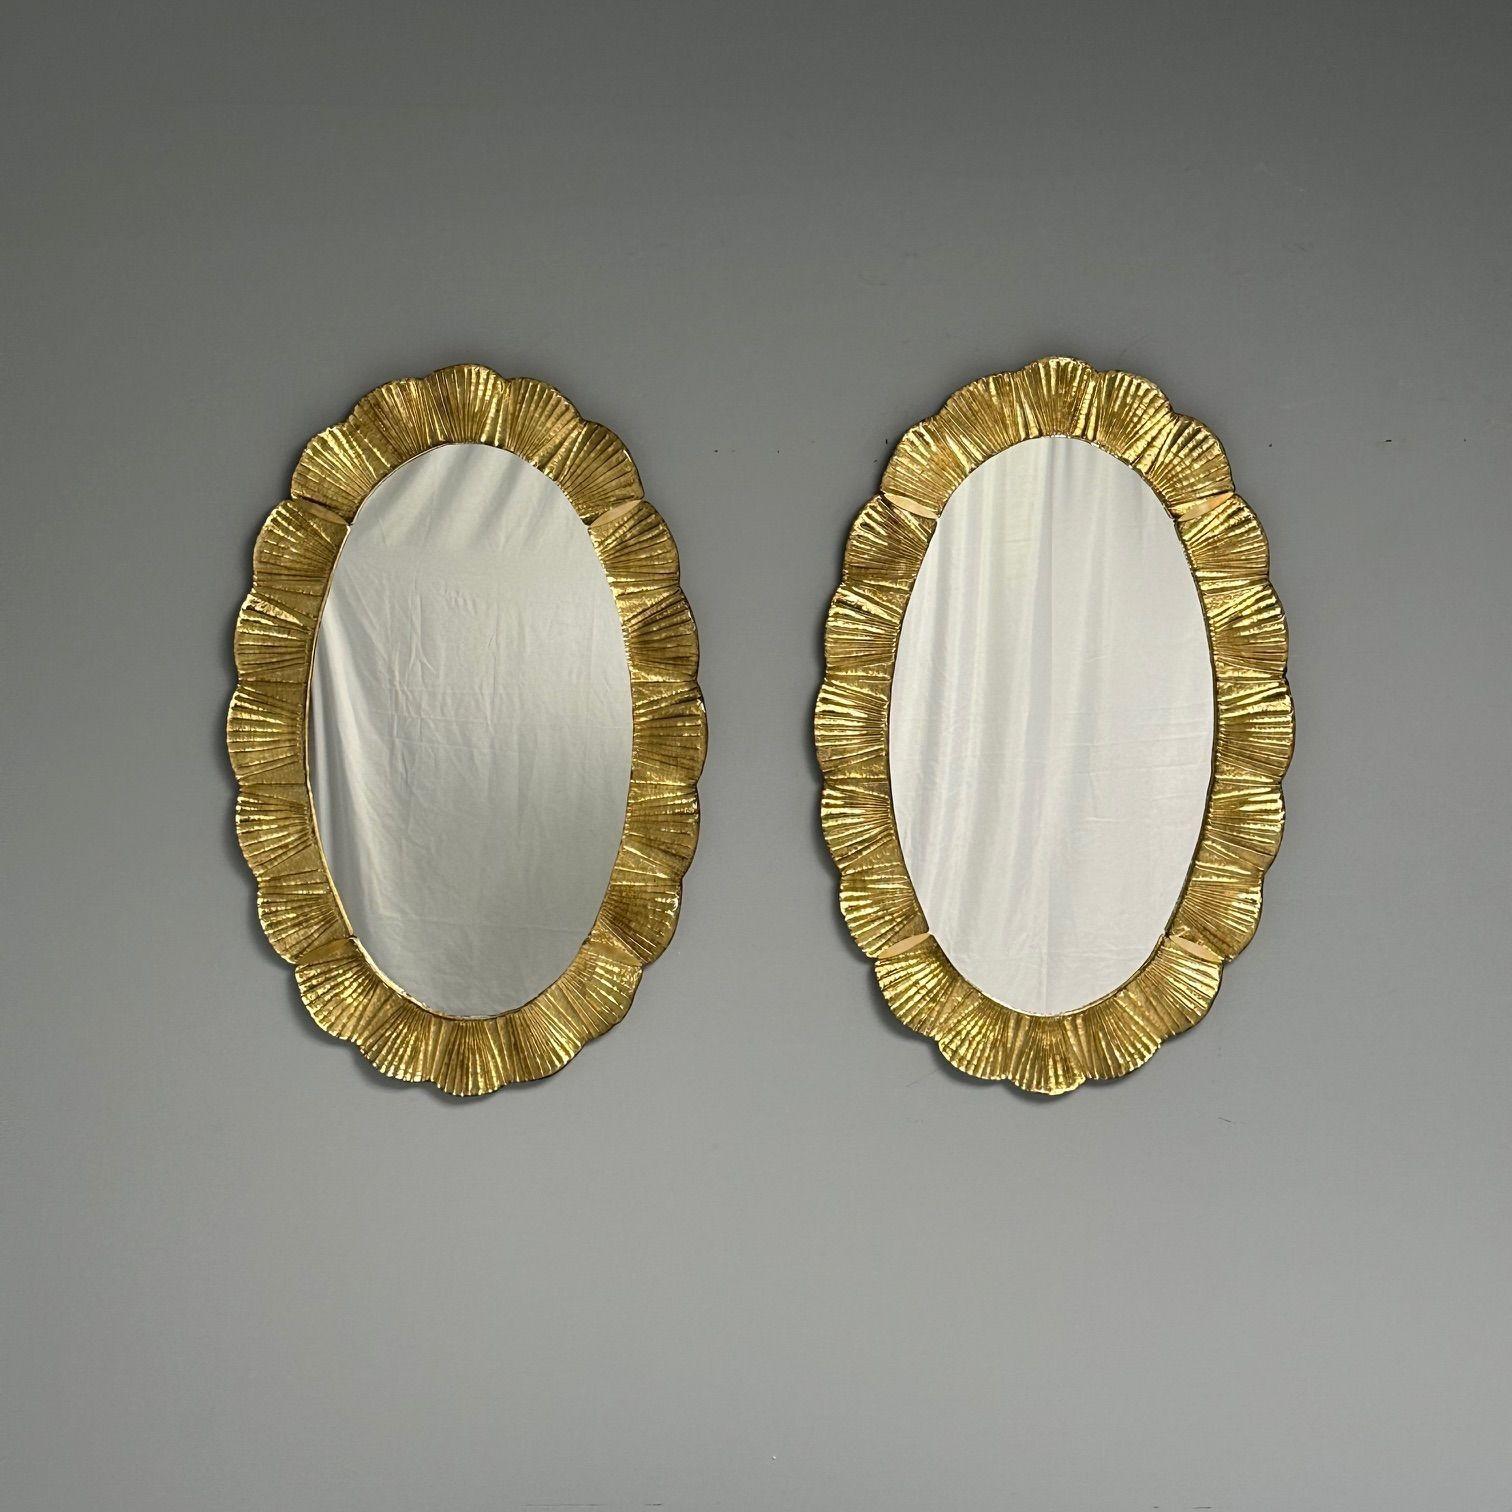 Brass Contemporary, Oval Wall Mirrors, Scallop Motif, Murano Glass, Gilt Gold, Italy For Sale